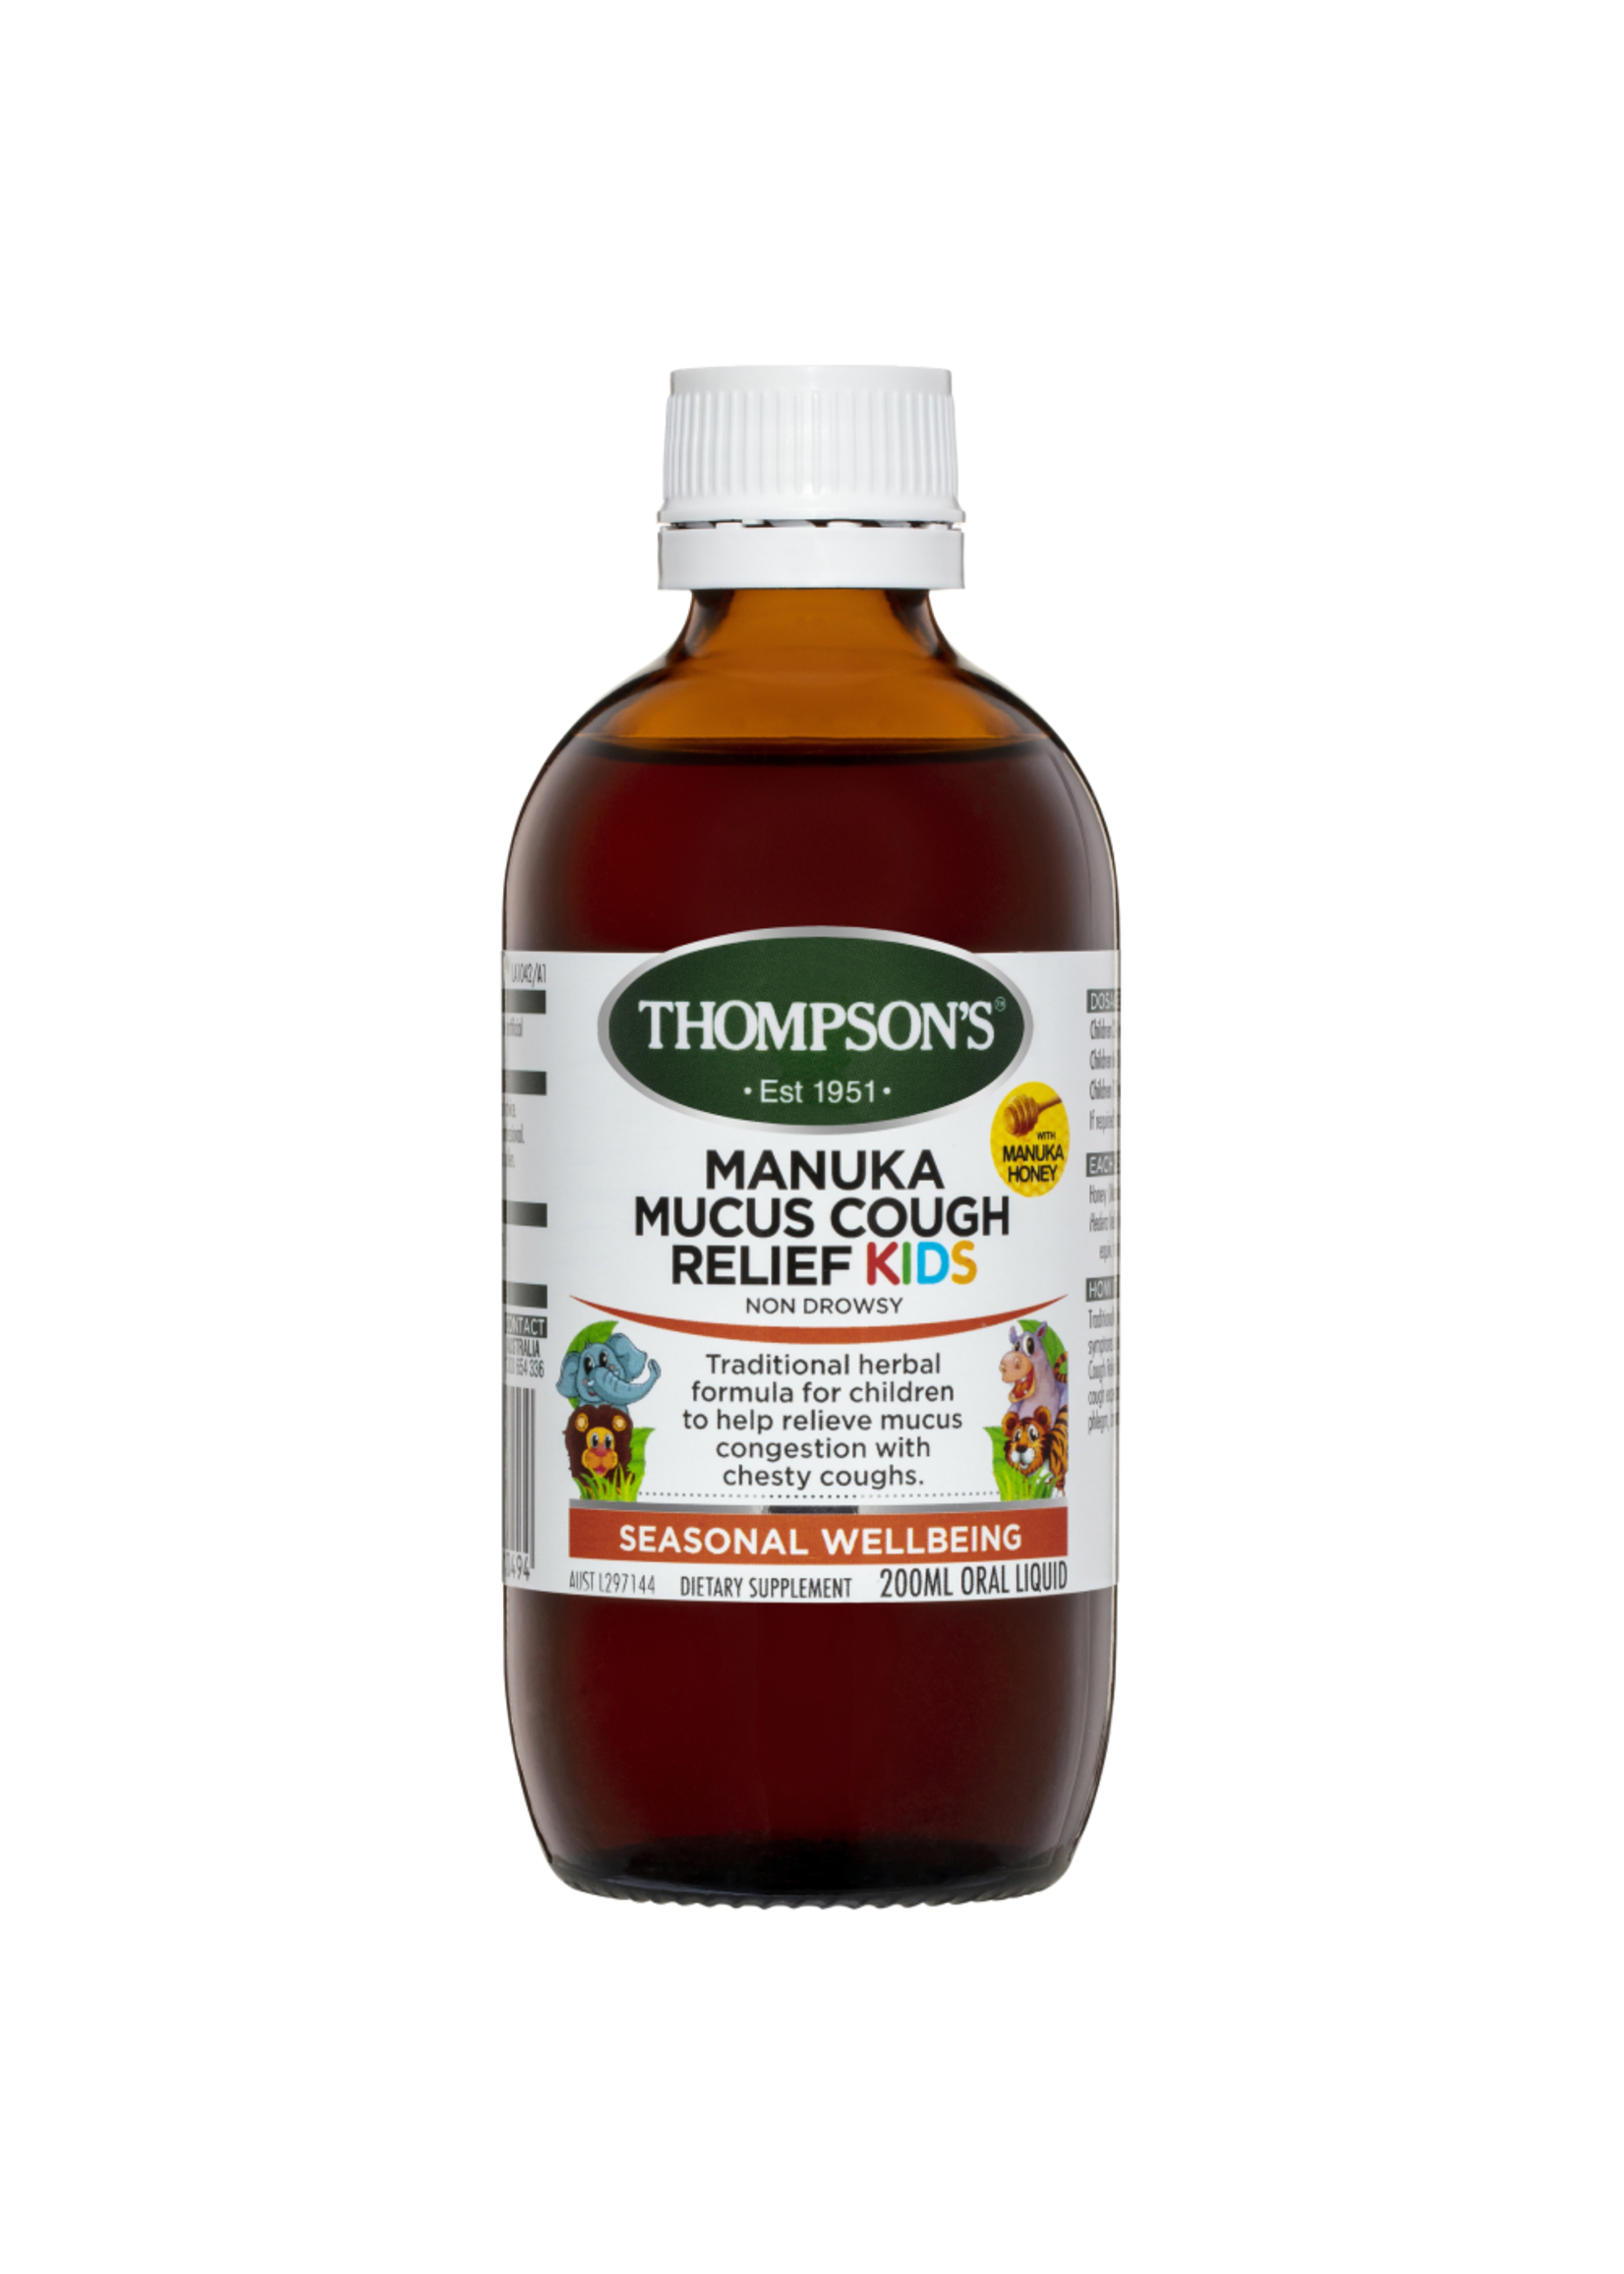 Thompsons Thompsons Manuka Mucus Cough Relief Kids 200ml non drowsy